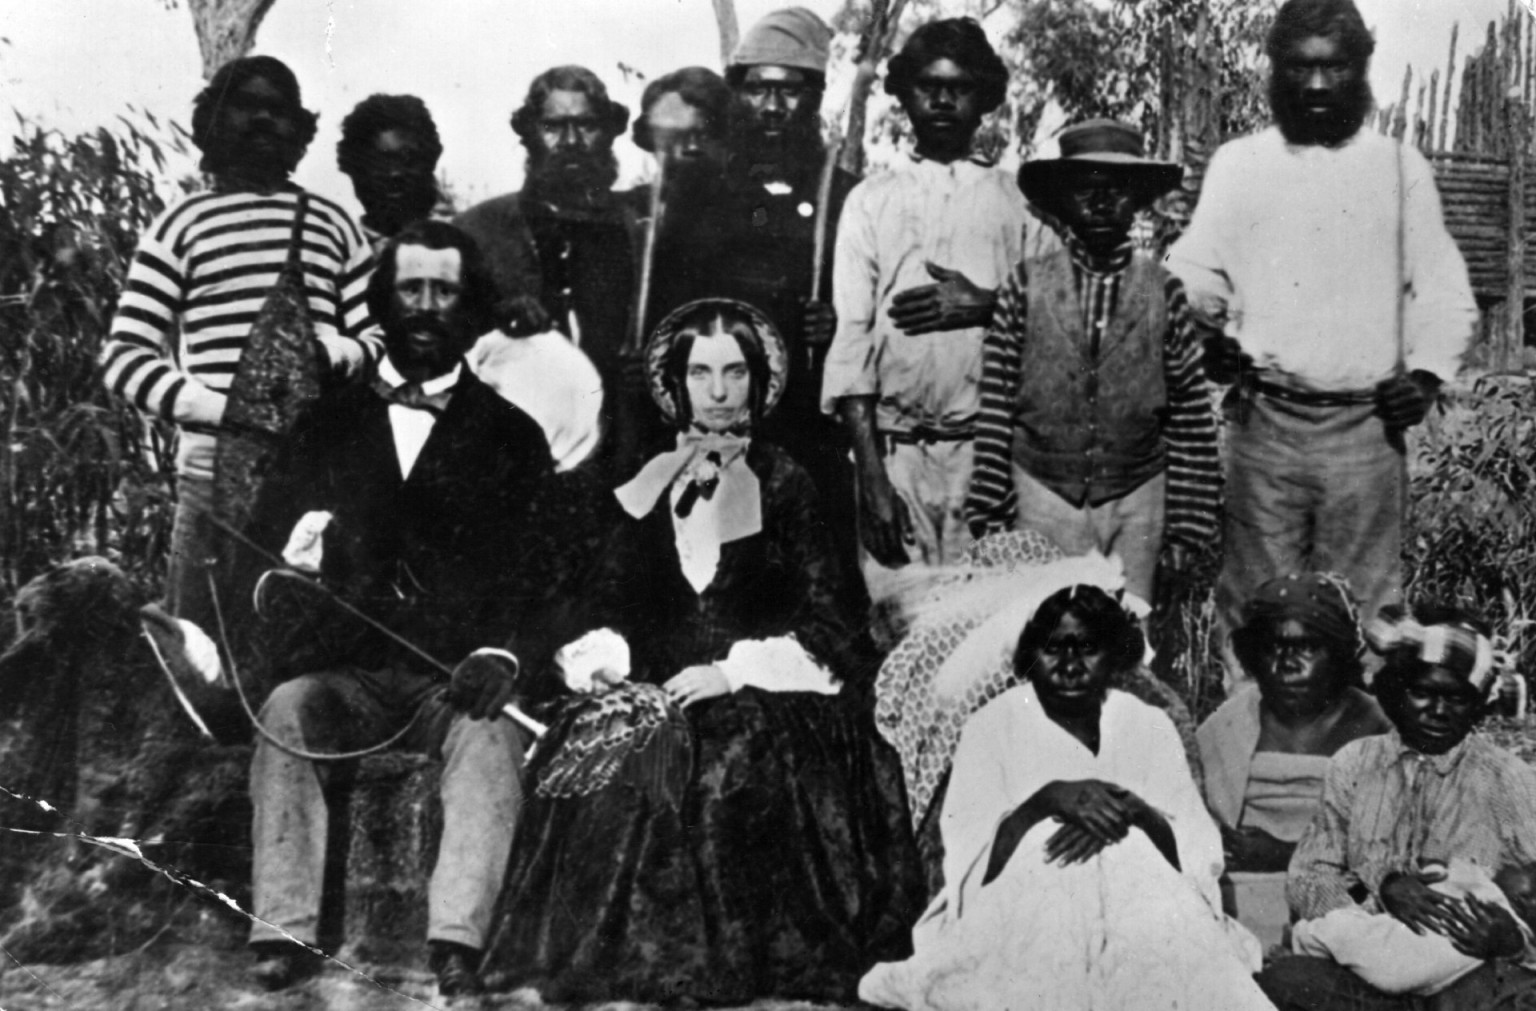 How Did Australia Become A British Penal Colony?